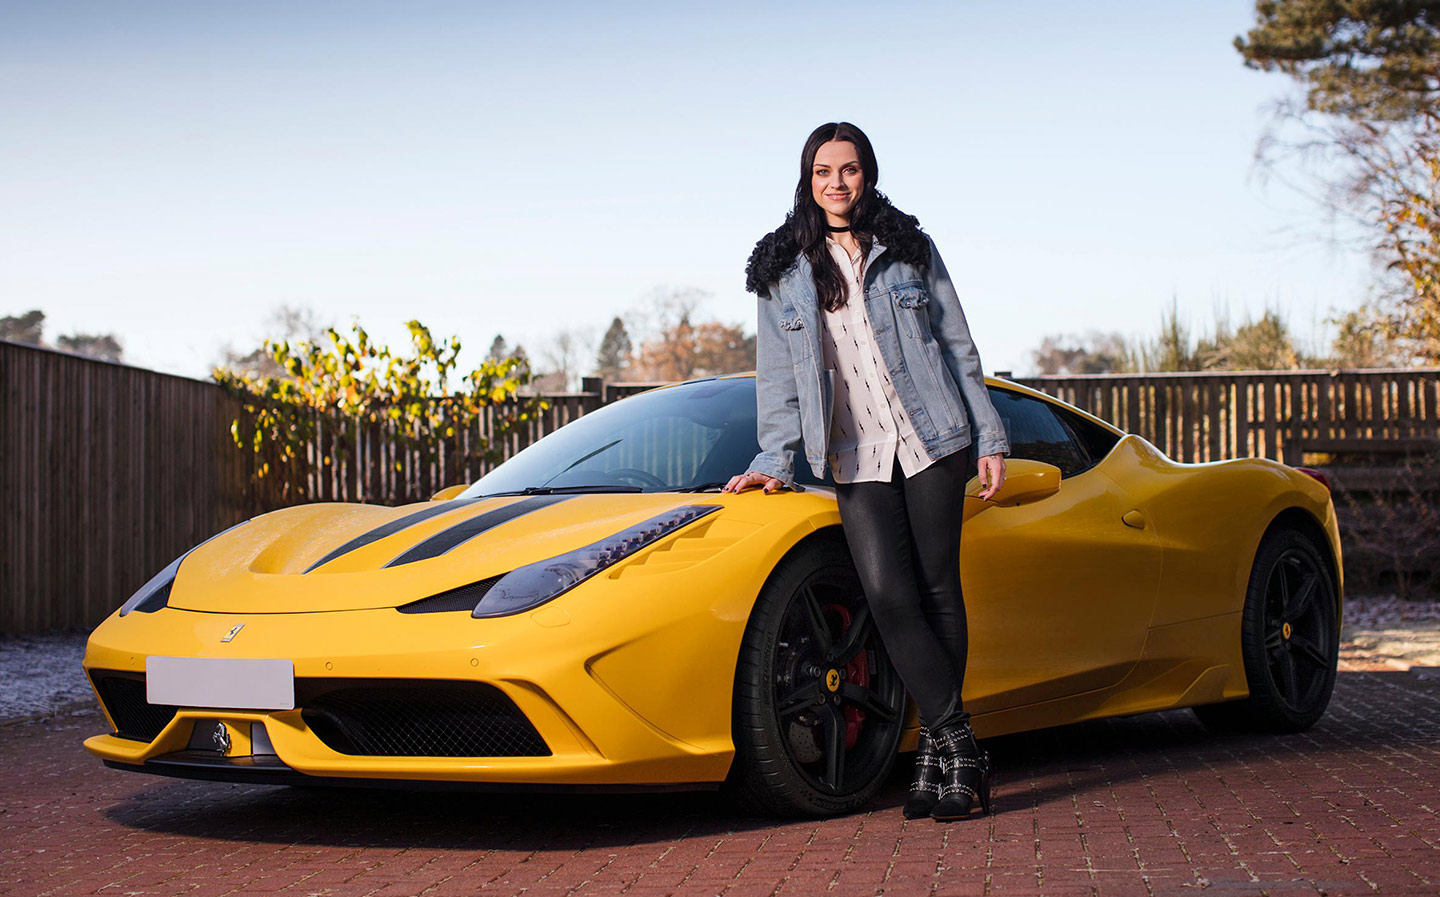 Me and My Motor: Singer-songwriter, Amy Macdonald, has a passion for fast cars